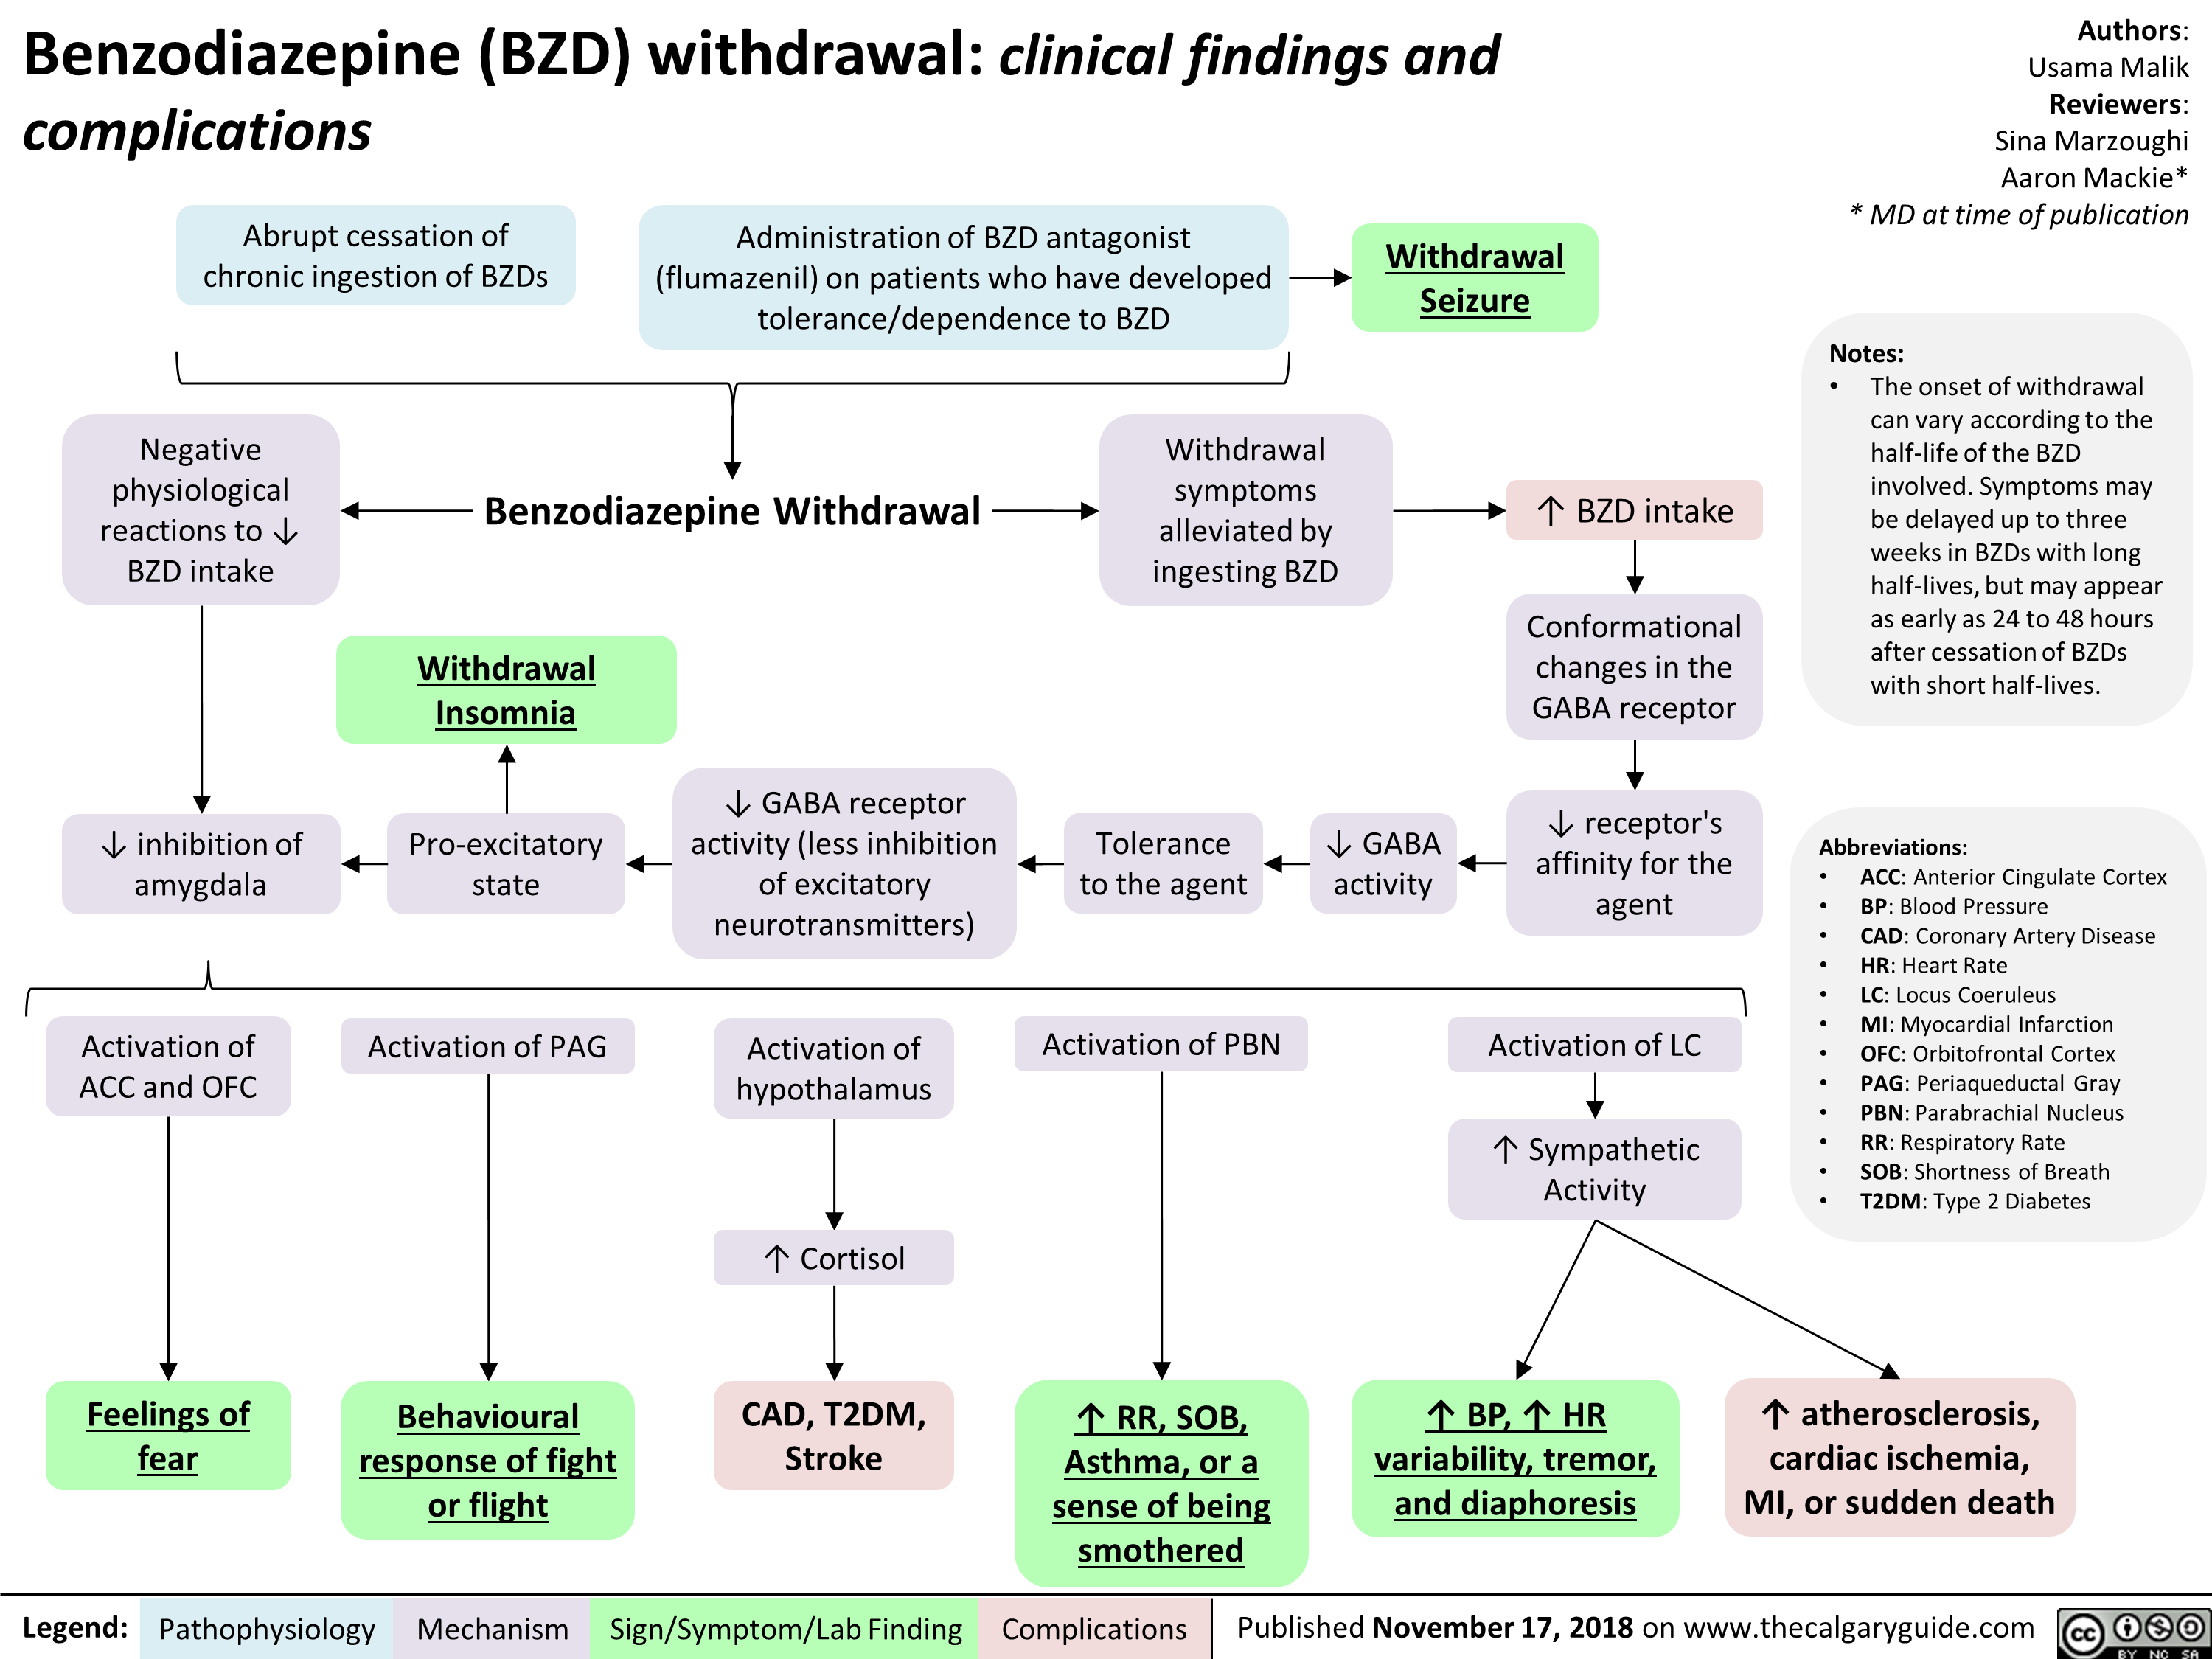 Benzodiazepine (BZD) withdrawal: clinical findings and complications 
Abrupt cessation of chronic ingestion of BZDs 
Administration of BZD antagonist (flumazenil) on patients who have developed -* tolerance/dependence to BZD 
Withdrawal Seizure  
Negative physiological reactions BZD intake inhibition a mygd to f, • of a la Withdrawal symptoms Benzodiazepine Withdrawal GABA receptor activity (less inhibition alleviated by ingesting BZD Tolerance GABA BZD intake Conformational changes in the GABA receptor 1, receptor's Withdrawal Insomnia Pro-excitatory 4— state of excitatory neurotransmitters) 4— to the agent activity affinity for the agent 
 A  
Activation of ACC and OFC 
Feelings of fear 
Activation of PAG 
Behavioural  response of fight or flight  
Legend: Pathophysiology Mechanism 
Activation of hypothalamus '1` Cortisol CAD, T2DM, Stroke 
Sign/Symptom/Lab Finding 
Activation of PBN 
V 
t RR, SOB,  Asthma, or a  sense of being smothered  
Activation of LC 
t Sympathetic Activity 
t BP, t HR  variability, tremor, and diaphoresis  
Authors: Usama Malik Reviewers: Sina Marzoughi Aaron Mackie* * MD at time of publication 
Notes: • The onset of withdrawal can vary according to the half-life of the BZD involved. Symptoms may be delayed up to three weeks in BZDs with long half-lives, but may appear as early as 24 to 48 hours after cessation of BZDs with short half-lives. 
Abbreviations: • ACC: Anterior Cingulate Cortex • BP: Blood Pressure • CAD: Coronary Artery Disease • HR: Heart Rate • LC: Locus Coeruleus • MI: Myocardial Infarction • OFC: Orbitofrontal Cortex • PAG: Periaqueductal Gray • PBN: Parabrachial Nucleus • RR: Respiratory Rate • SOB: Shortness of Breath • T2DM: Type 2 Diabetes 
I` atherosclerosis, cardiac ischemia, MI, or sudden death 